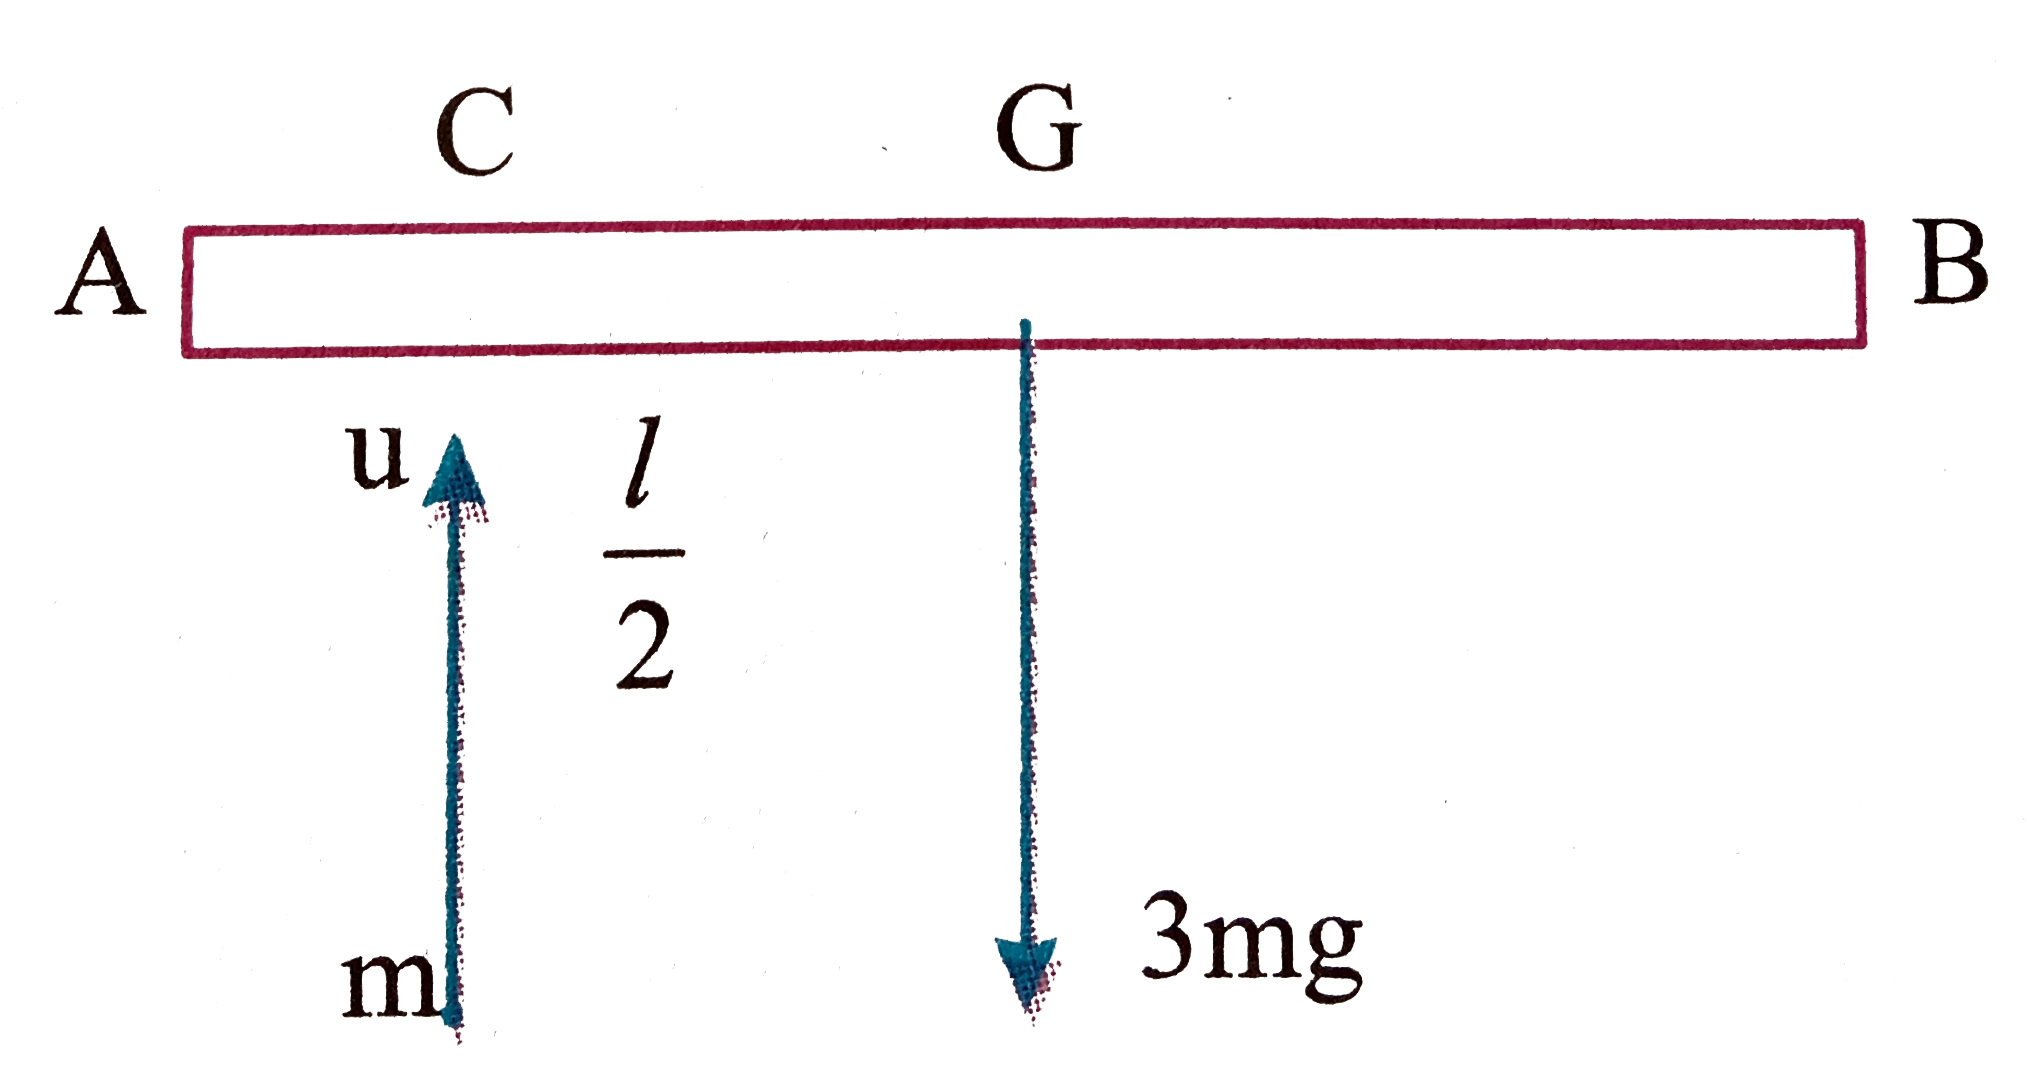 A rod AB of mass 3m and length 4a is falling freely in a horizontal position and c is a point distance a from A. When the speed of the rod is u, the point c collides with a particle of mass m which is moving vertically upwards with speed u. if the impact between the particle and the rod is perfectely elastic find      The angular velocity of the rod immediately after the impact